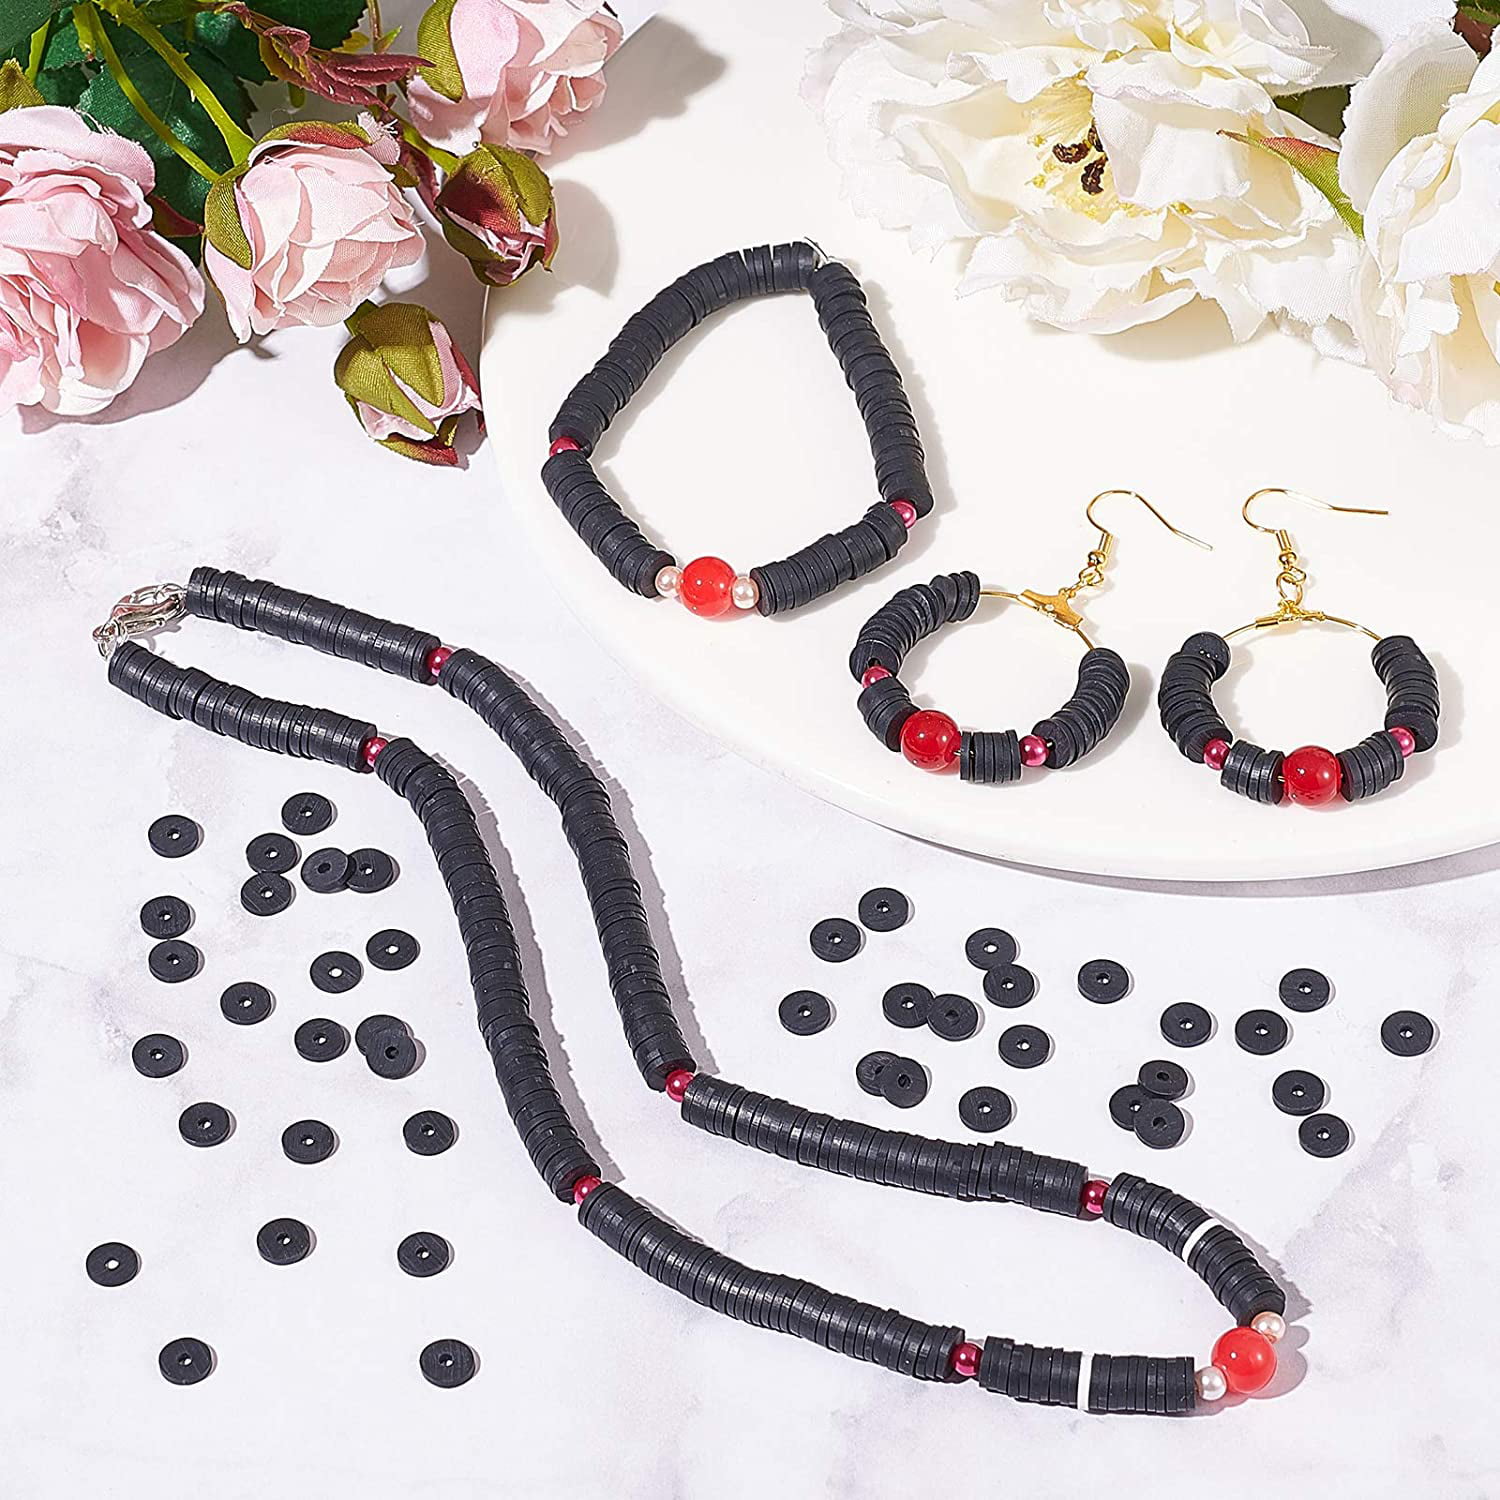  3000Pcs Clay Beads Flat Round Polymer Bead Vinyl Heishi Beads  Flat Round Polymer Bead Flat Clay Beads for Jewelry Making Necklace  Bracelet (22-Black)